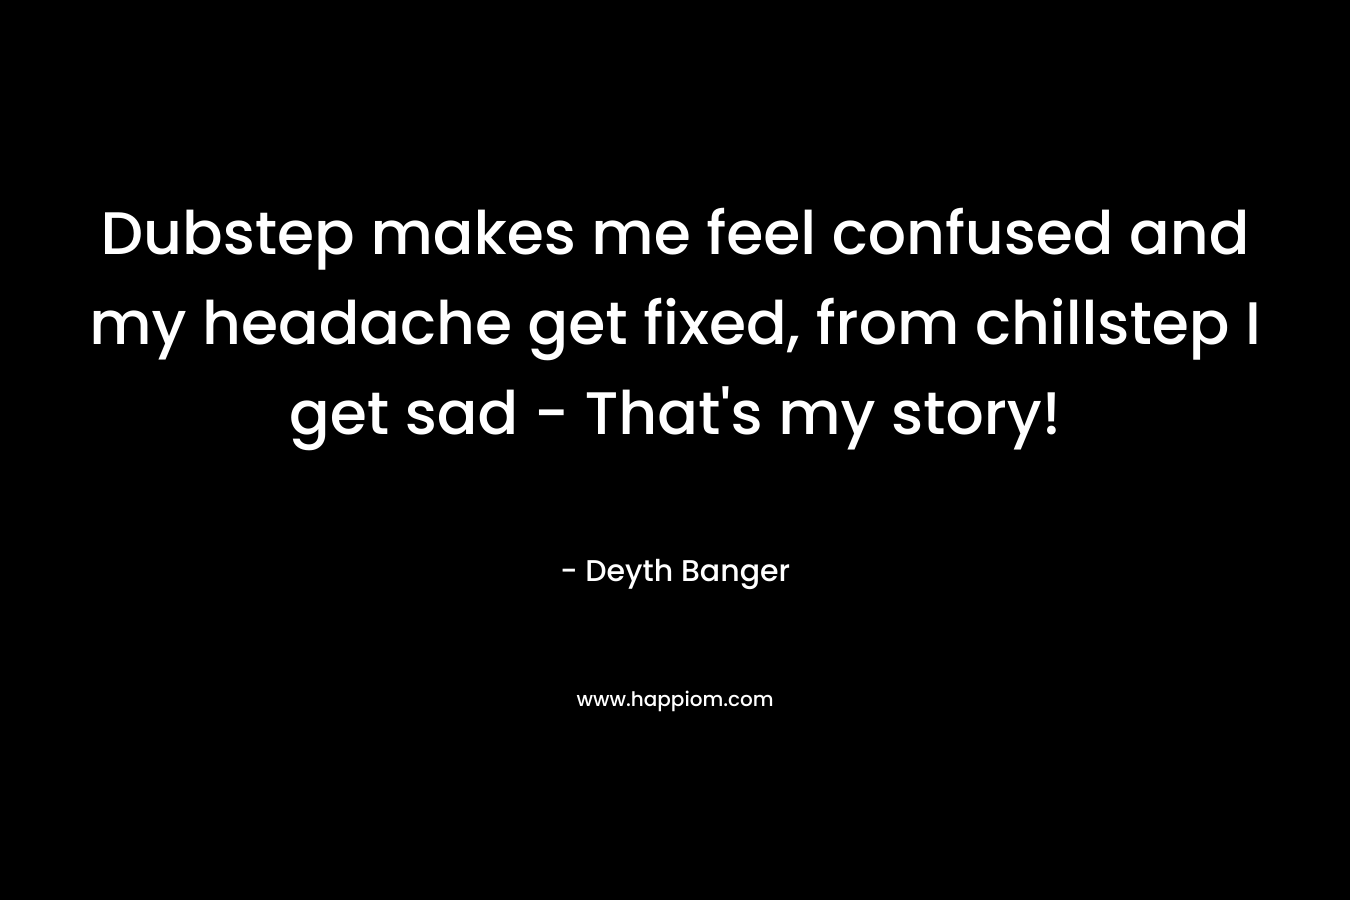 Dubstep makes me feel confused and my headache get fixed, from chillstep I get sad - That's my story!